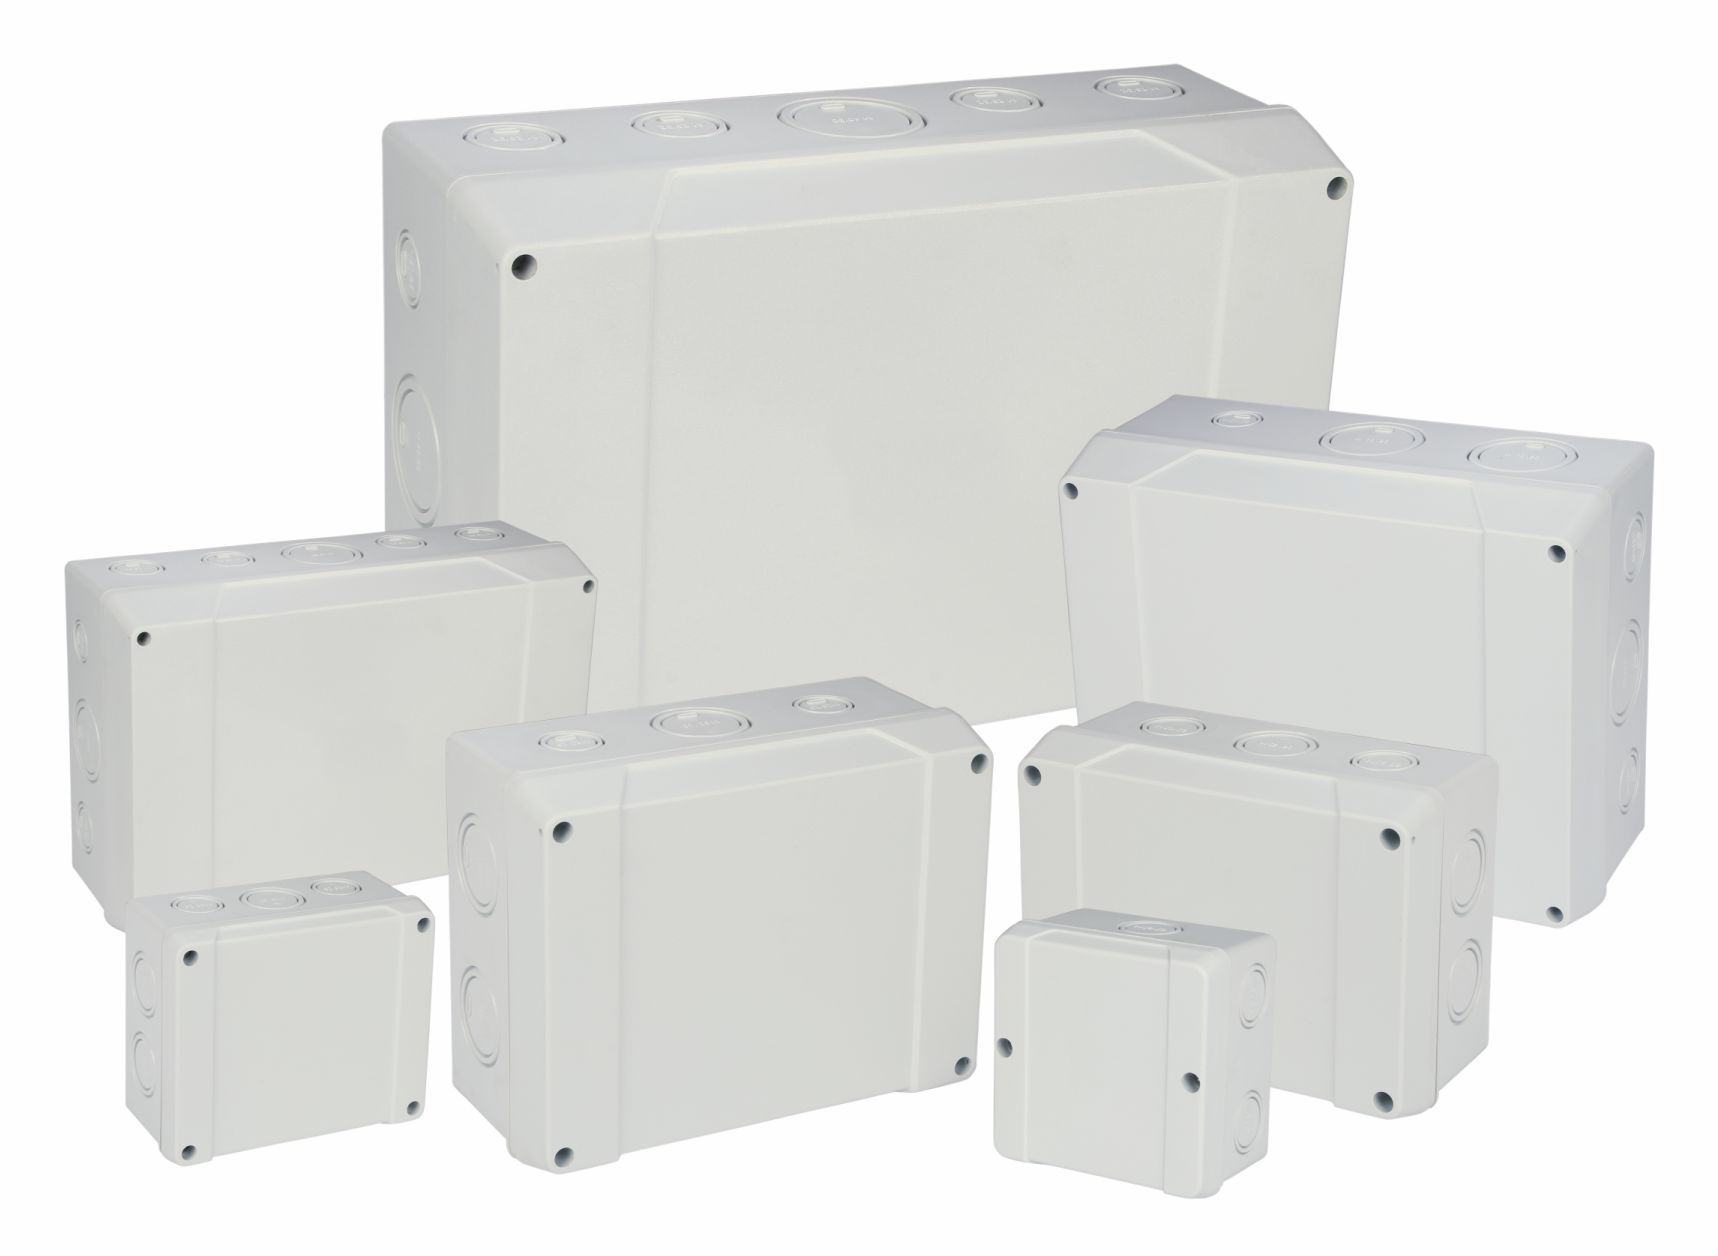 Waterproof Junction Box For Electrical Use In Mumbai | Electrical Cabinet Accessories 